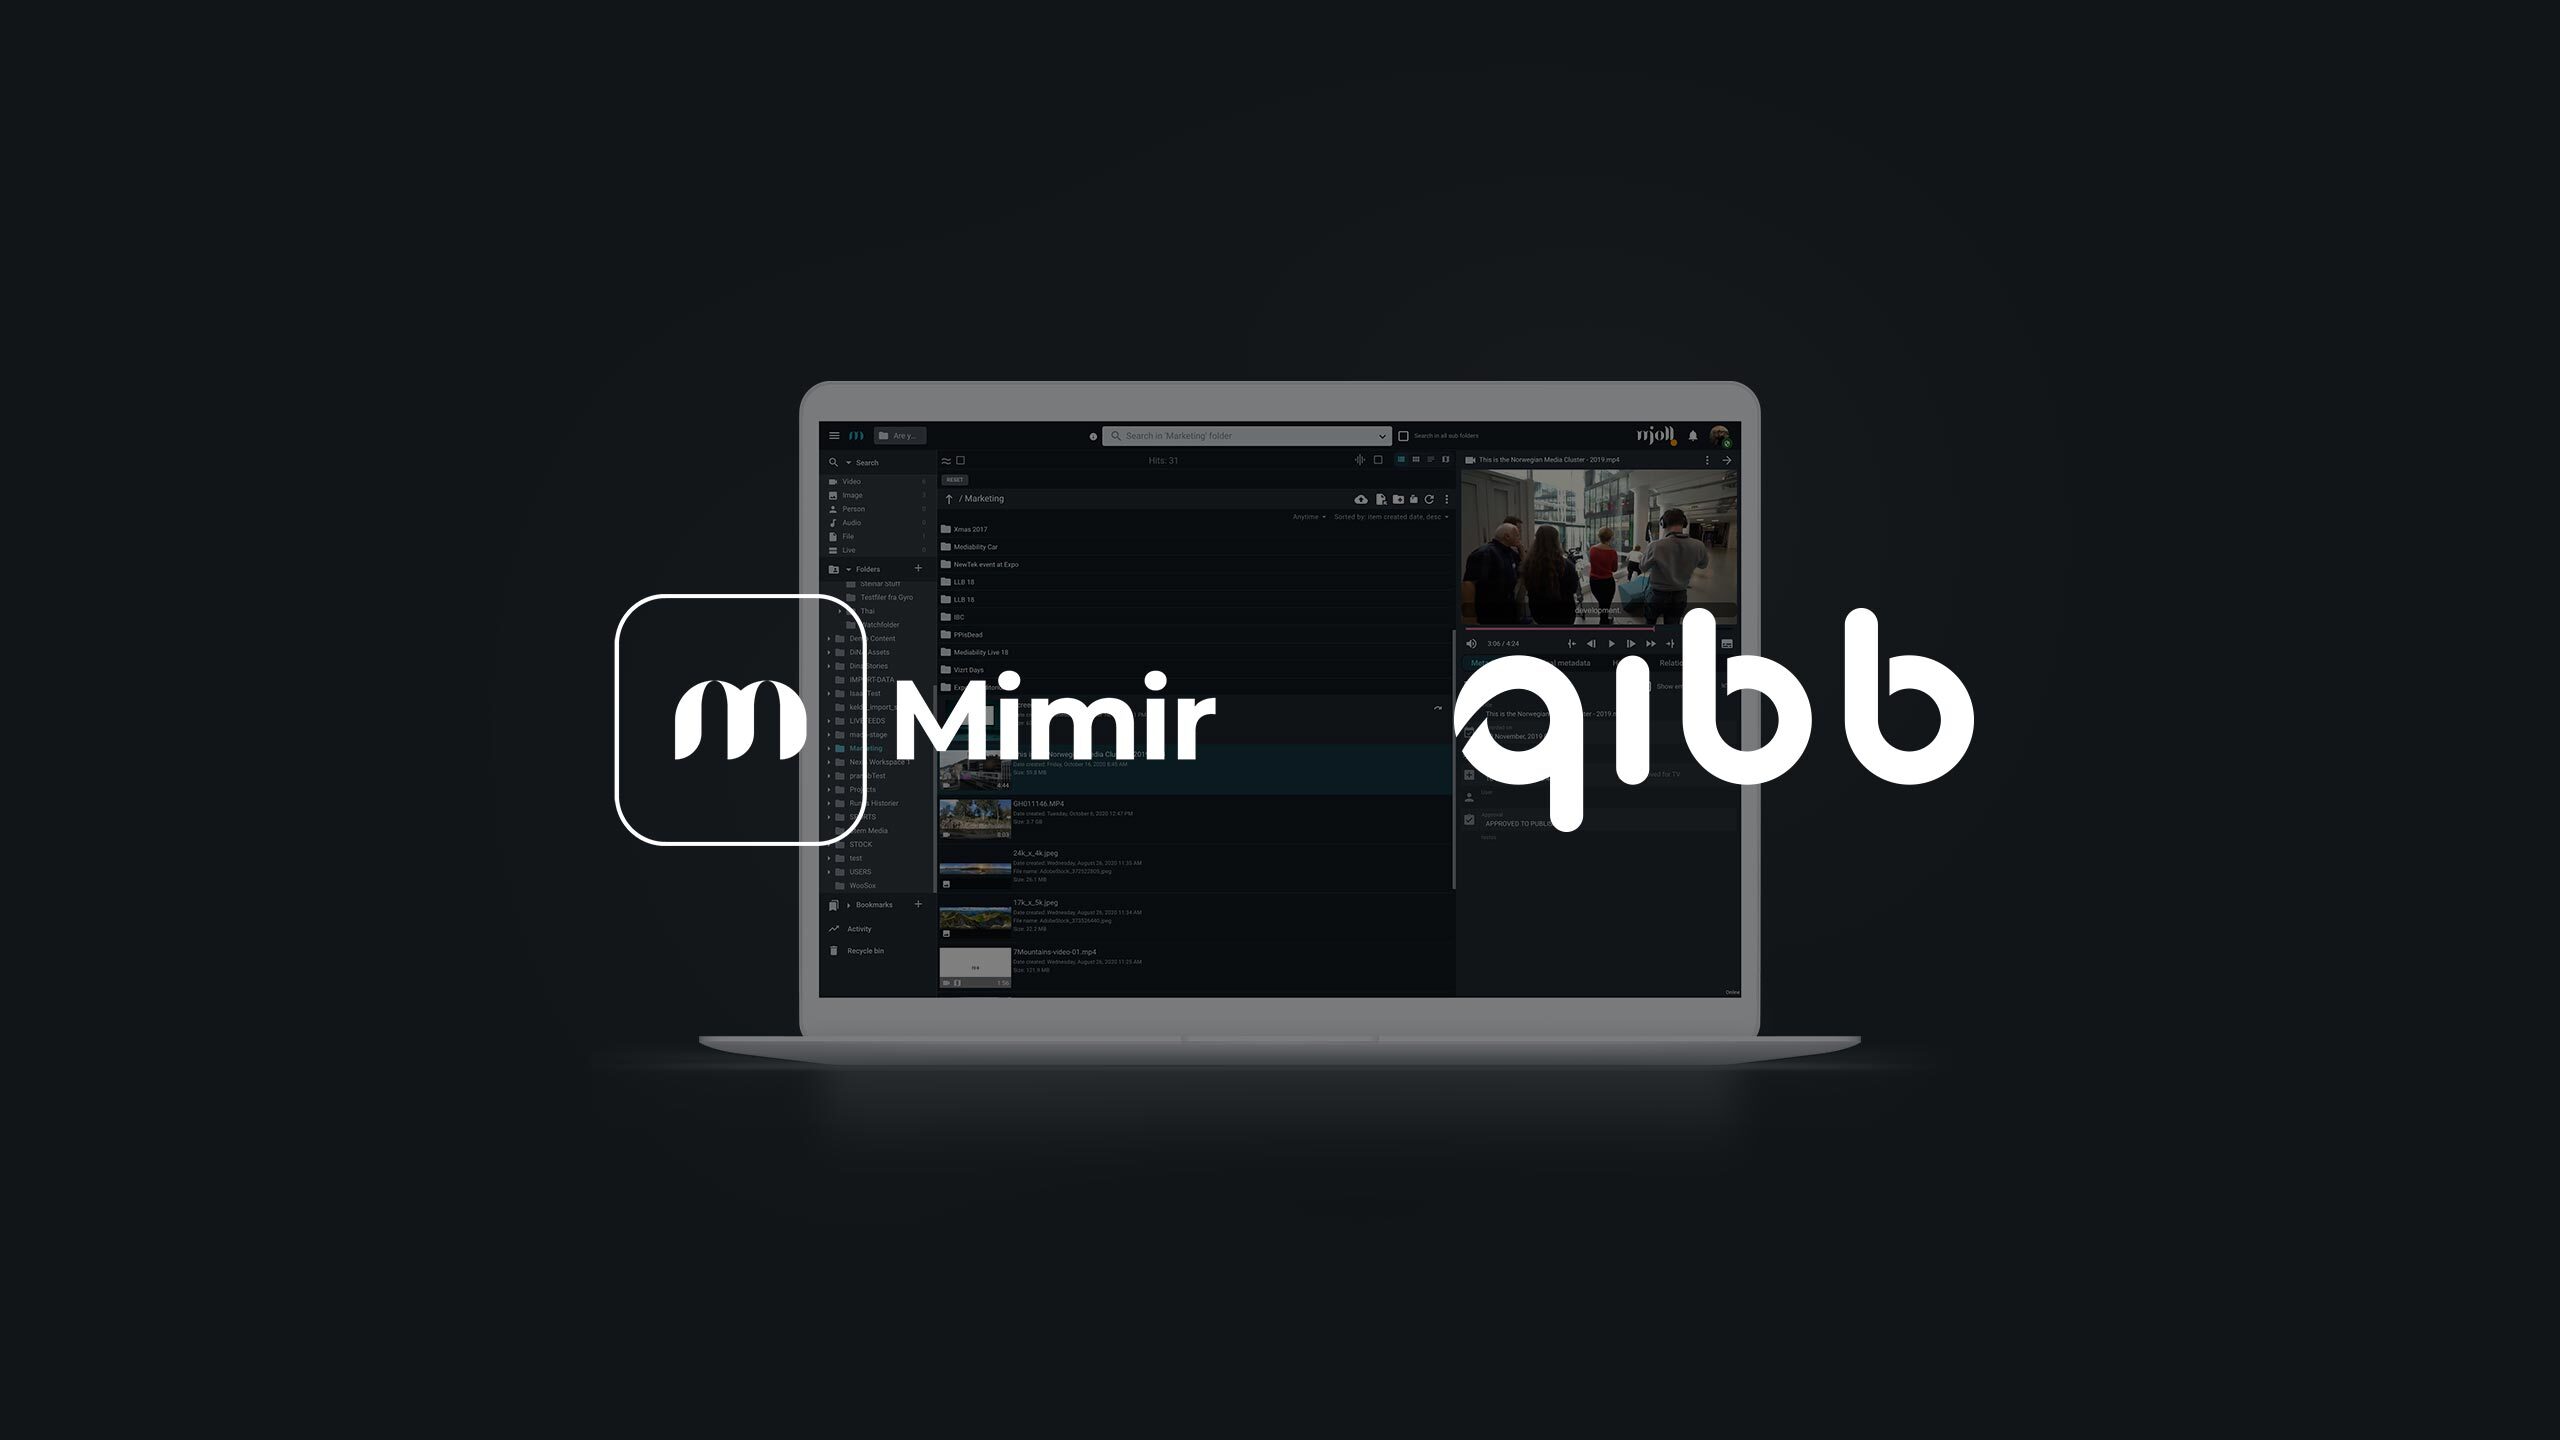 Mimir and qibb marketing banner